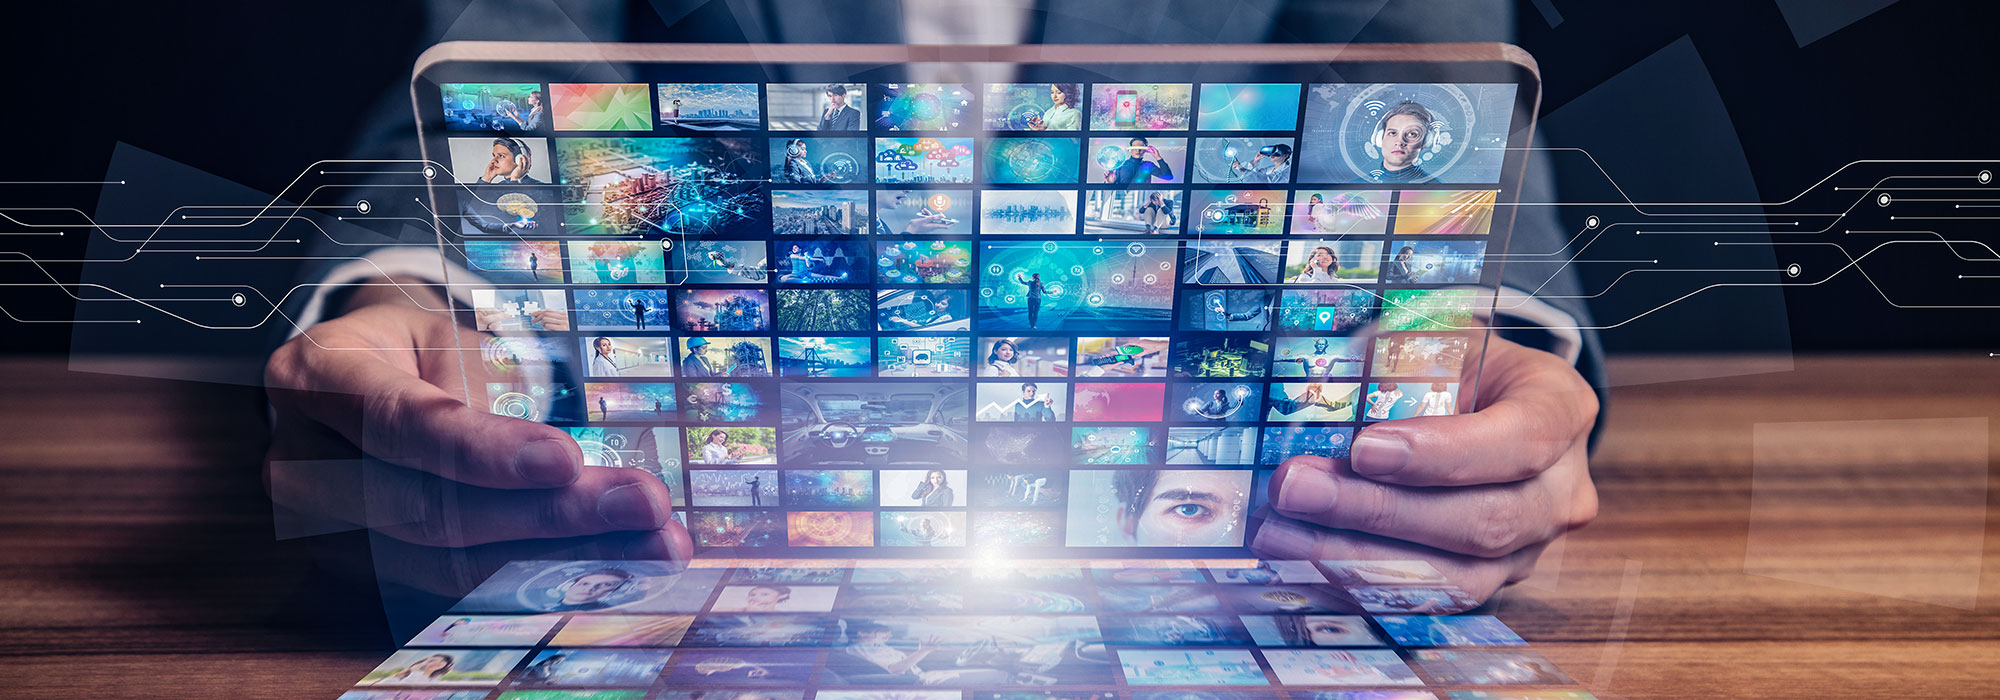 The Future of Streaming: Emerging Trends and Technologies - CDNetworks